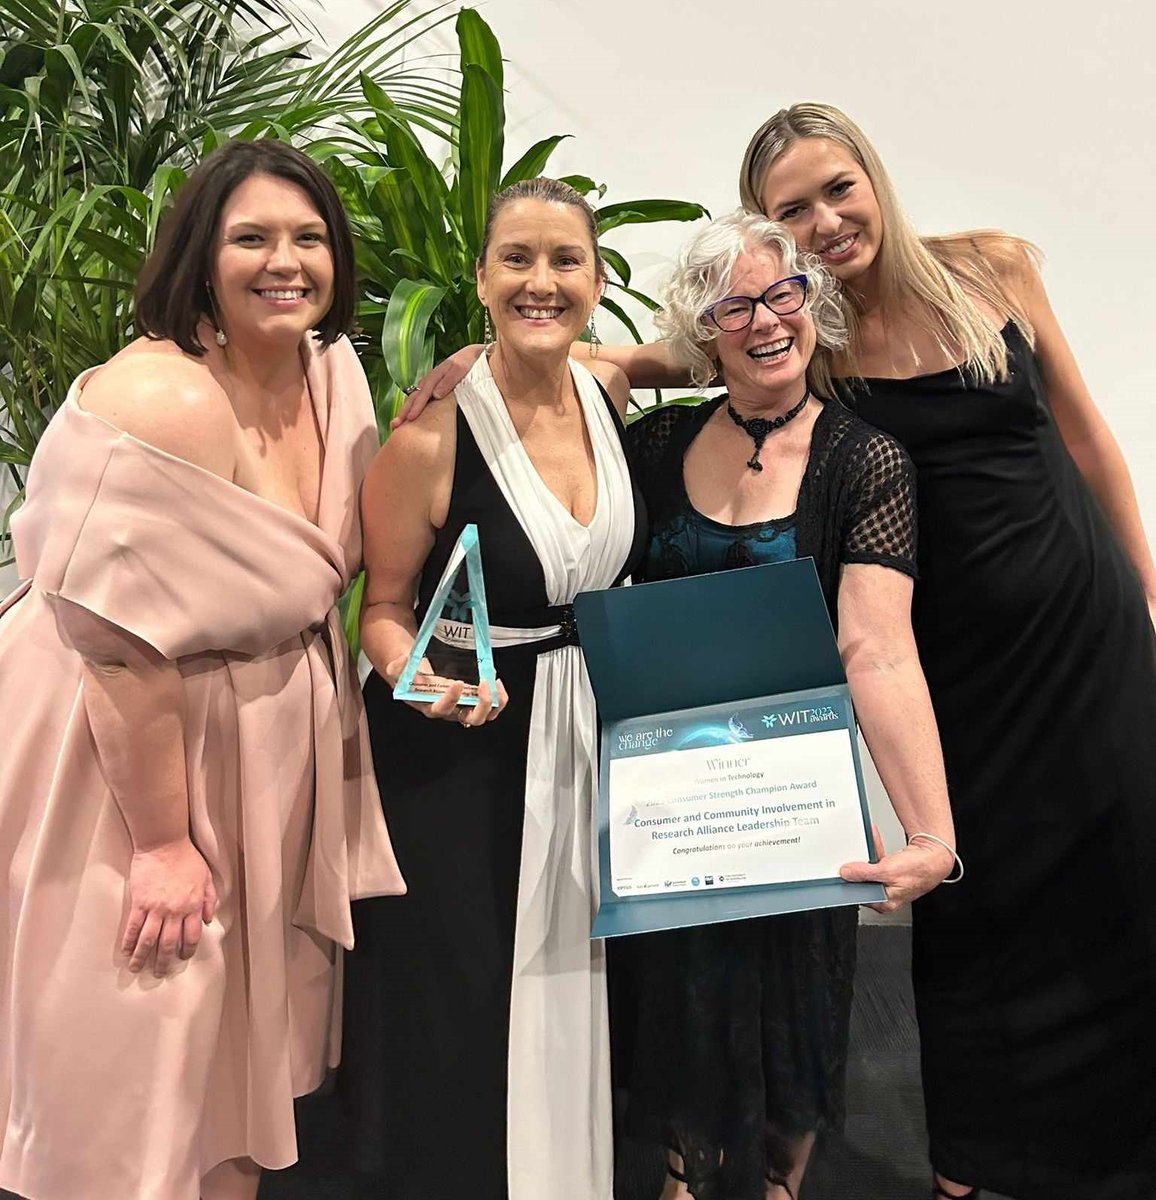 Congratulations to our KT and Engagement Manager, Alison Bell, part of a team that won the Consumer Strength Champion award at the Qld Women in Technology @witqld awards. 
The team are driving change across the research landscape in Qld - #livedexperiencematters